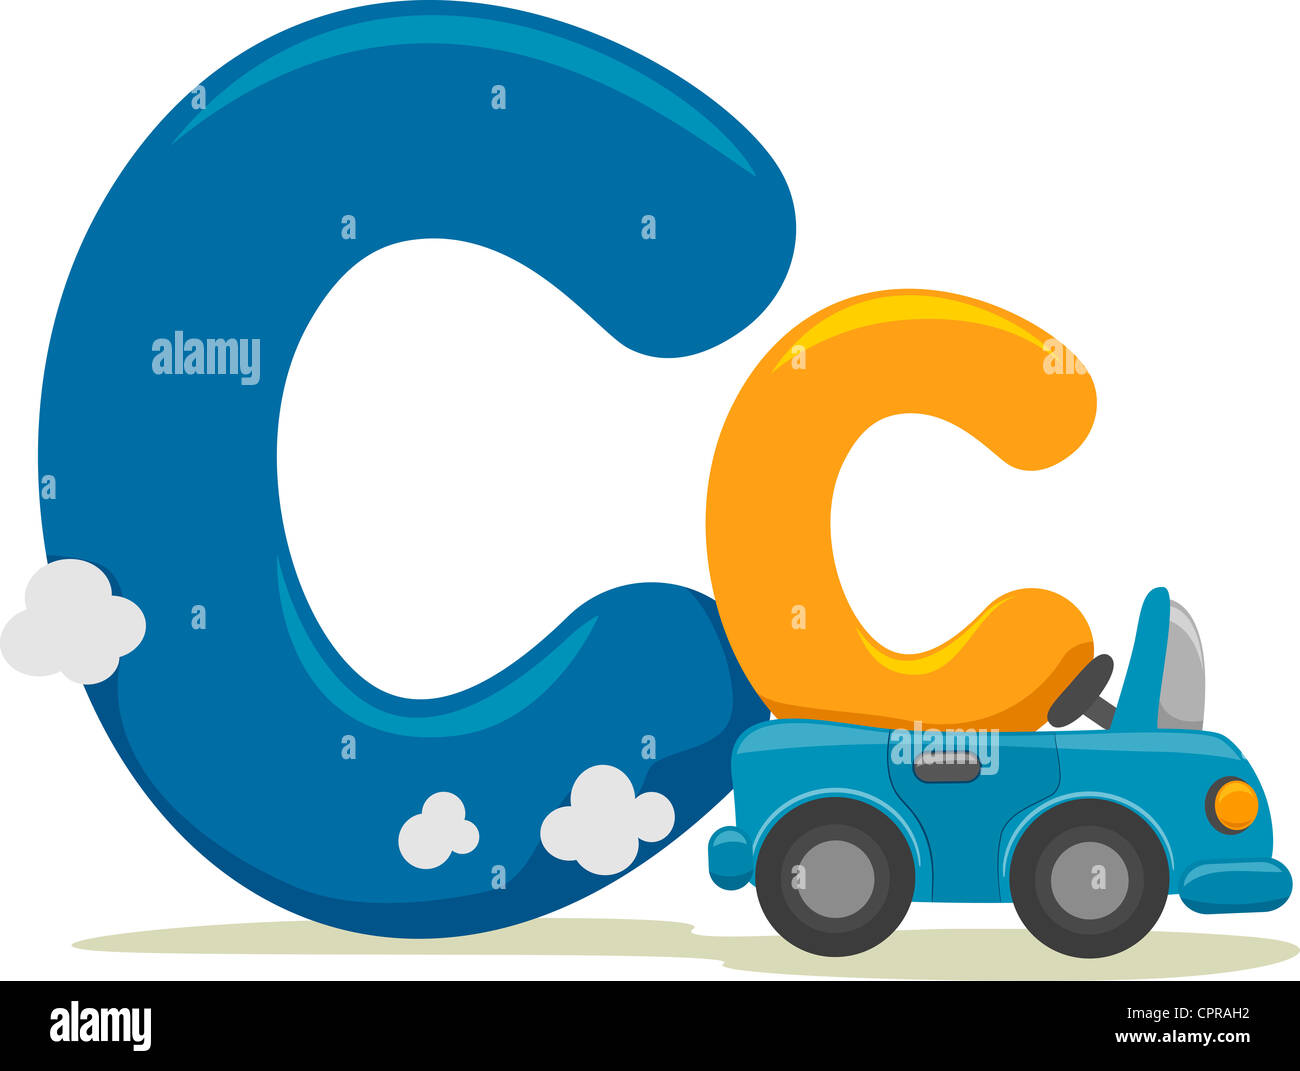 Illustration Featuring the Letter C Stock Photo